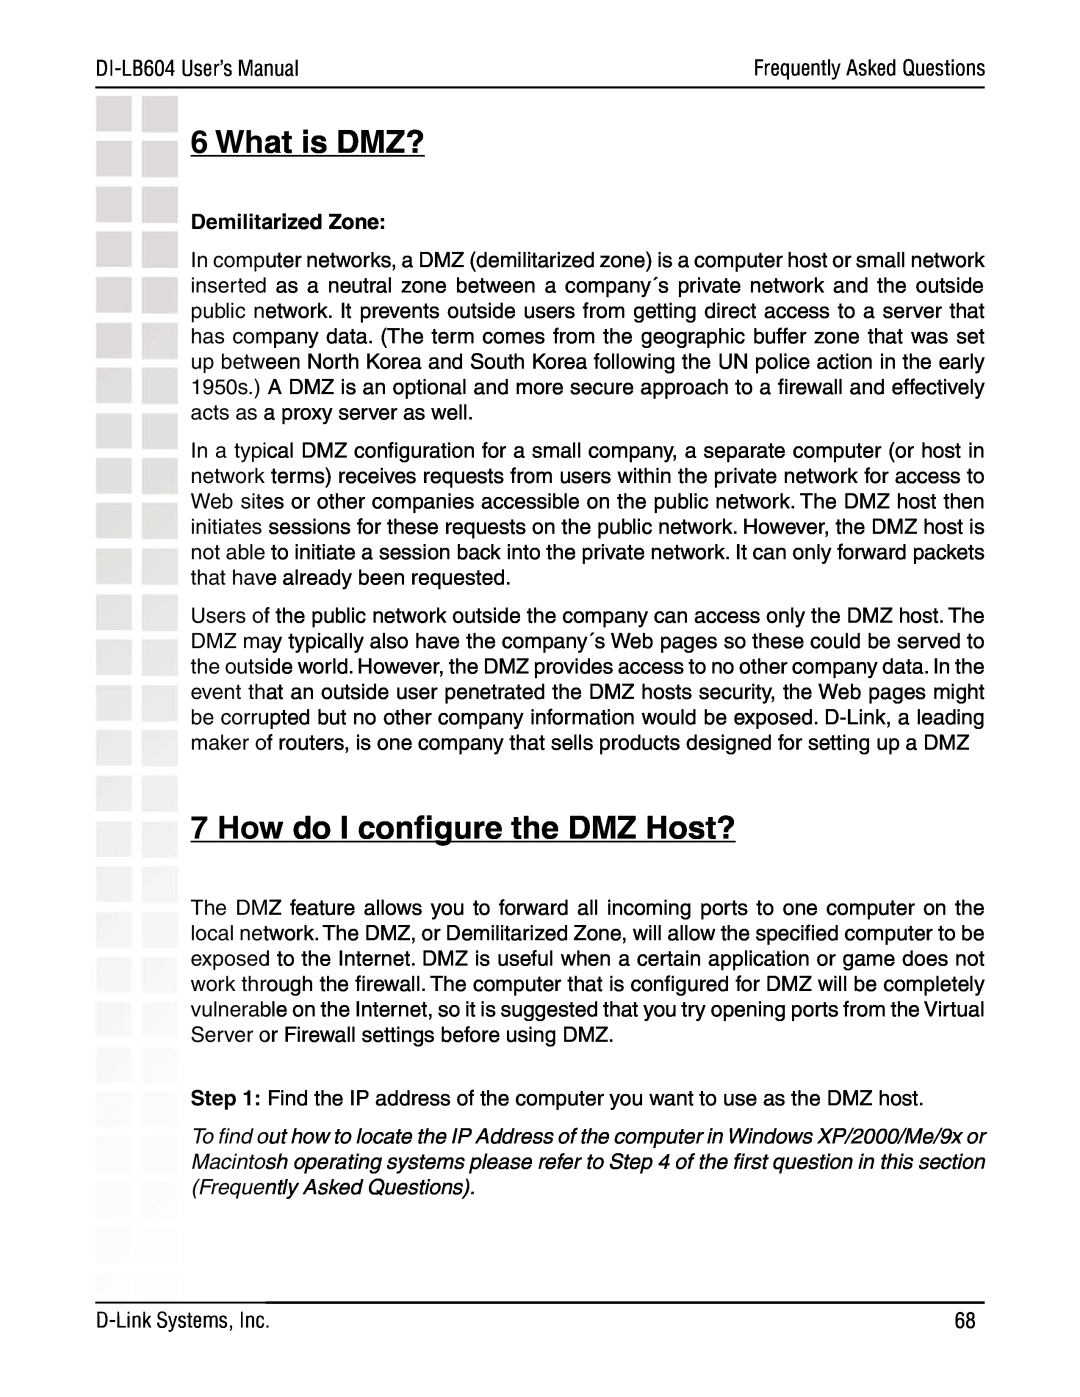 D-Link DI-LB604 manual What is DMZ?, How do I conﬁgure the DMZ Host?, Demilitarized Zone 